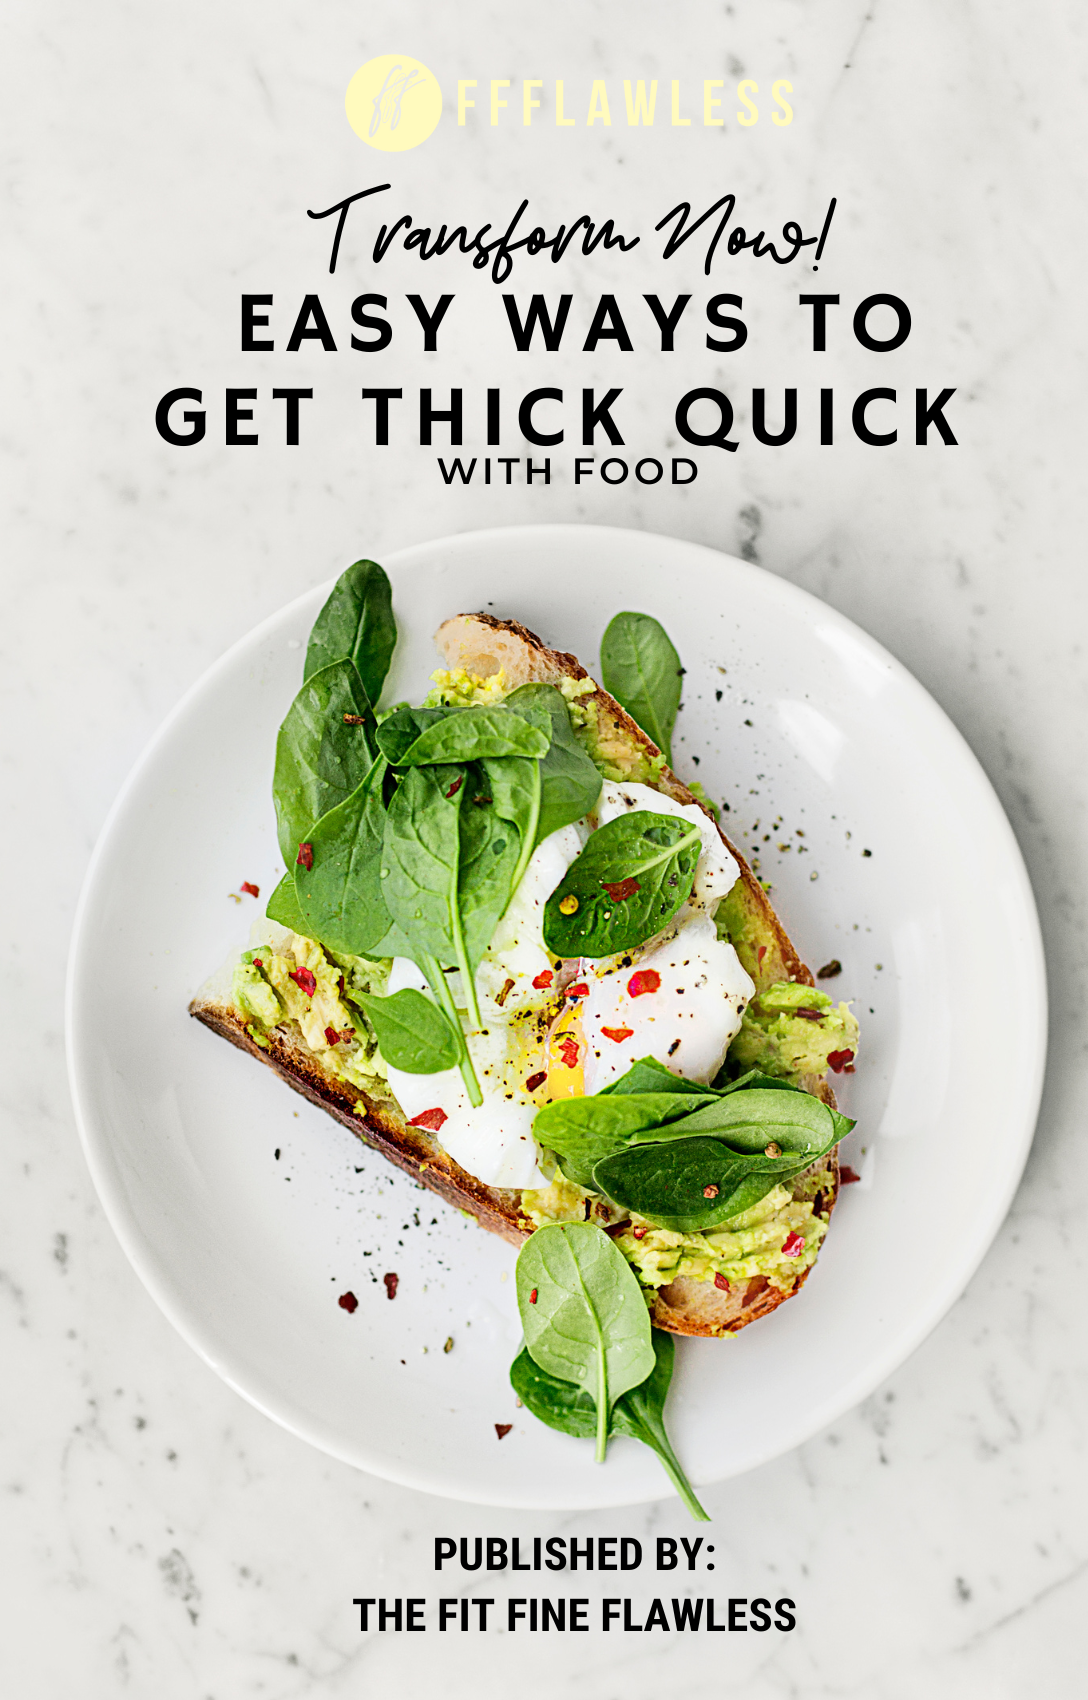 Transform Now! Easy Ways To get thick quick with food